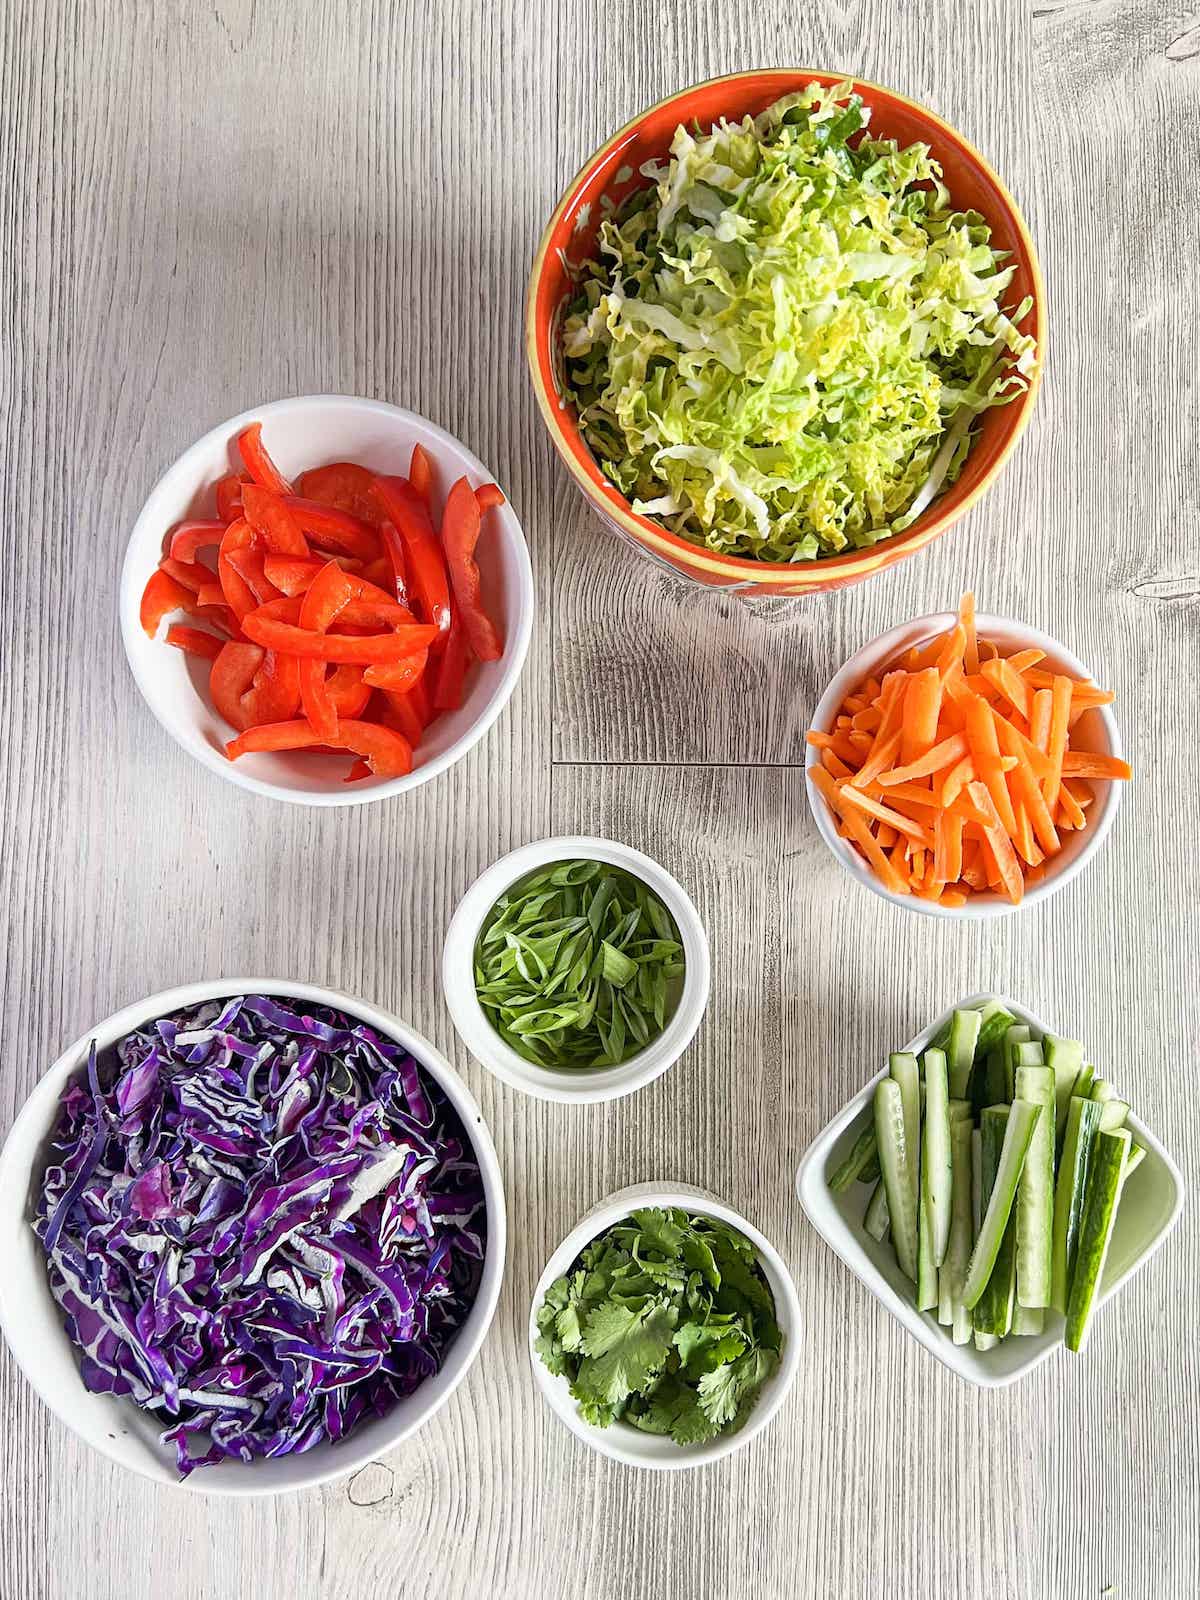 Red cabbage, napa cabbage, red pepper, carrot, cucumber, cilantro and scallions all chopped in little bowls.